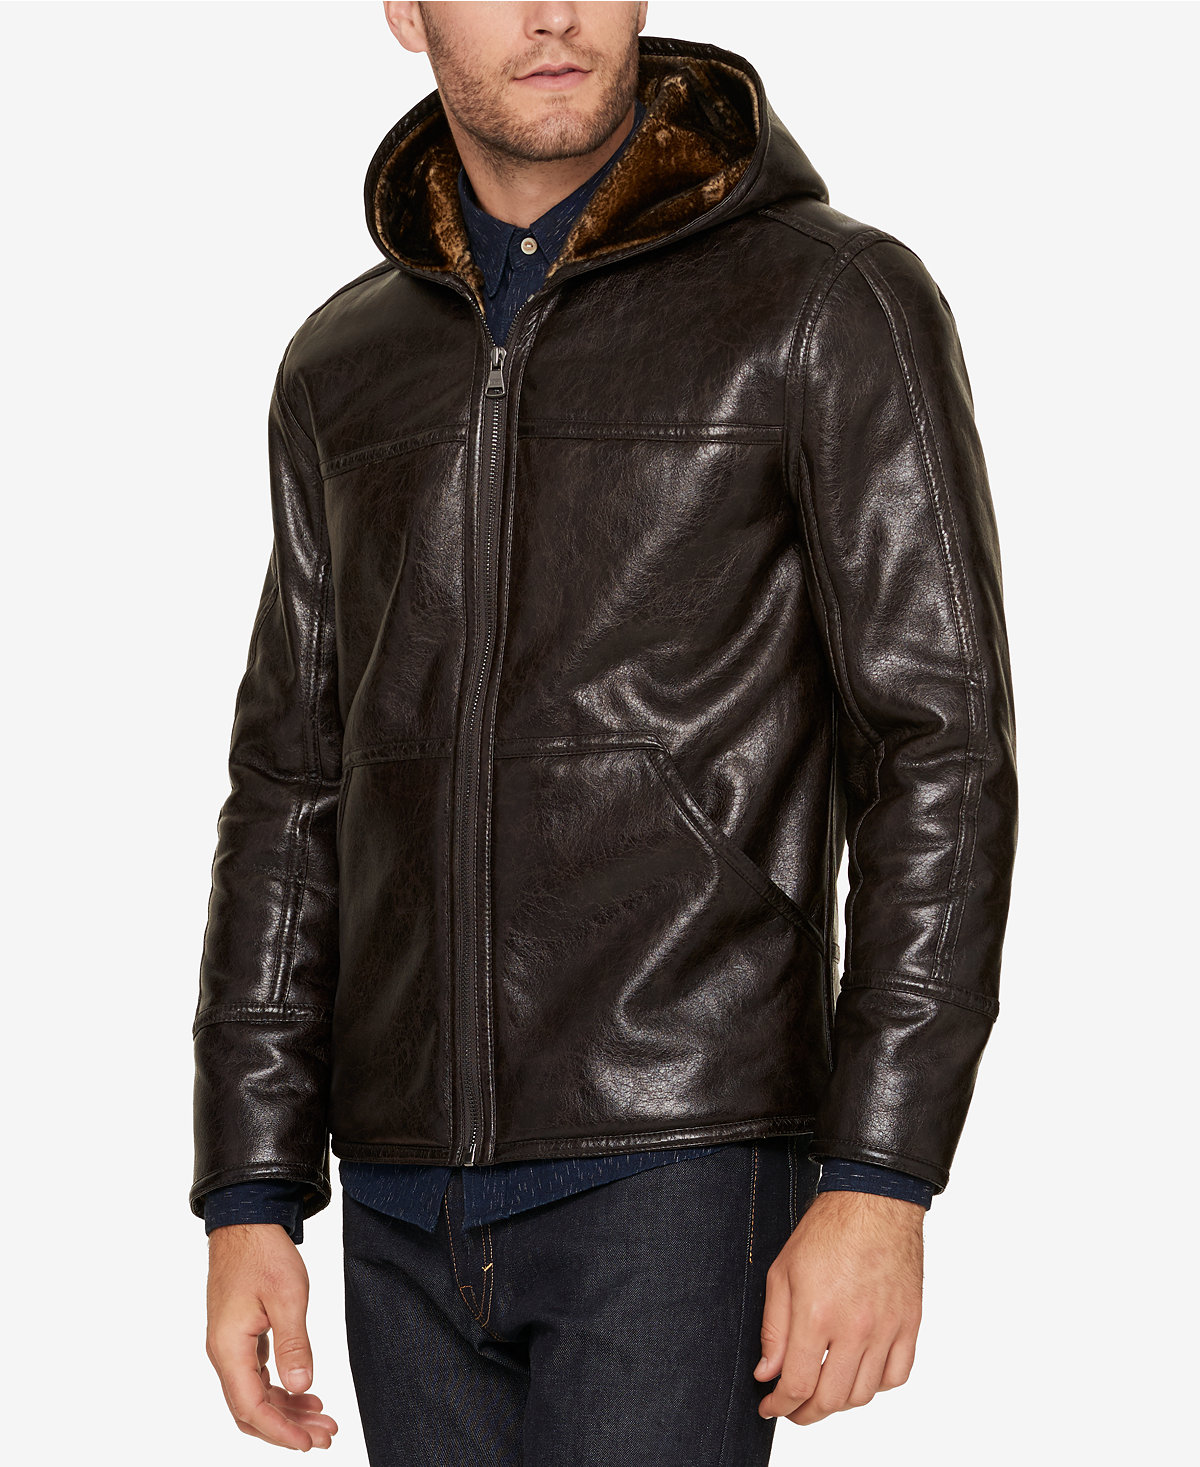 Sleeves the mens faux leather jackets uk chart vocabulary english, North face outlet online shopping, plus size mother of the bride dresses uk. 